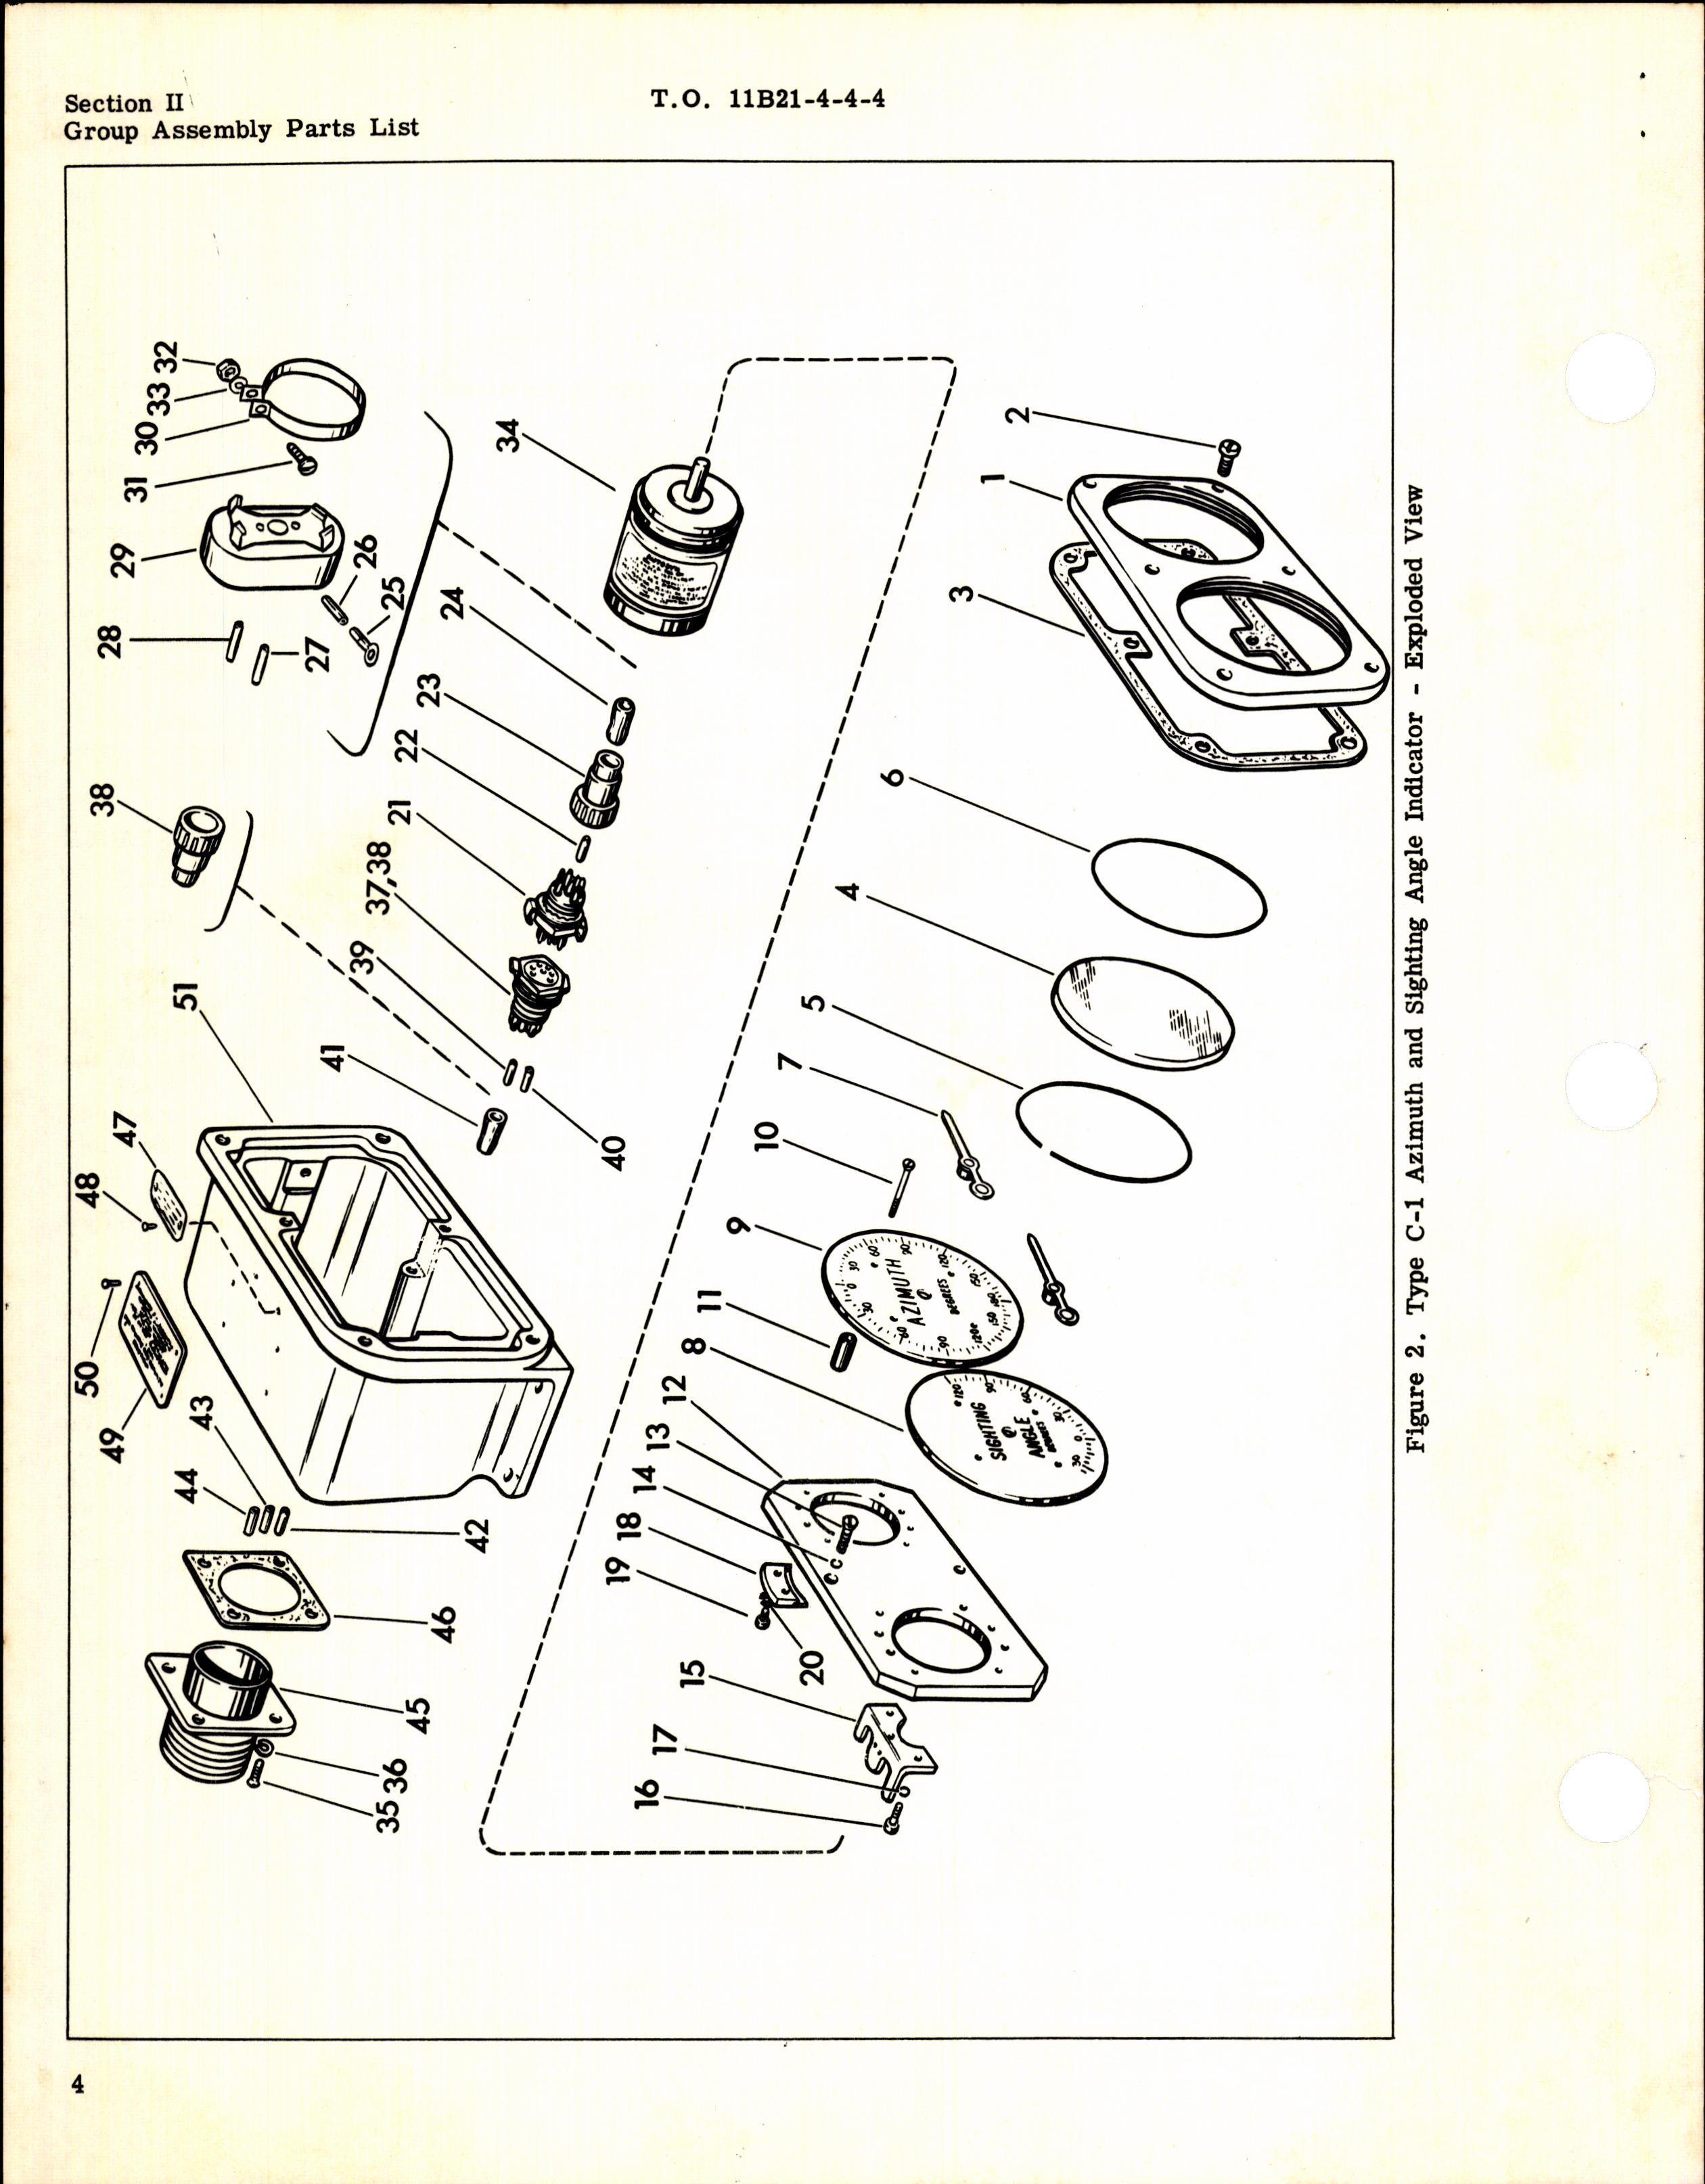 Sample page 6 from AirCorps Library document: Illustrated Parts Breakdown for Type C-1, and C-1A Azimuth and Sighting Angle Indicator